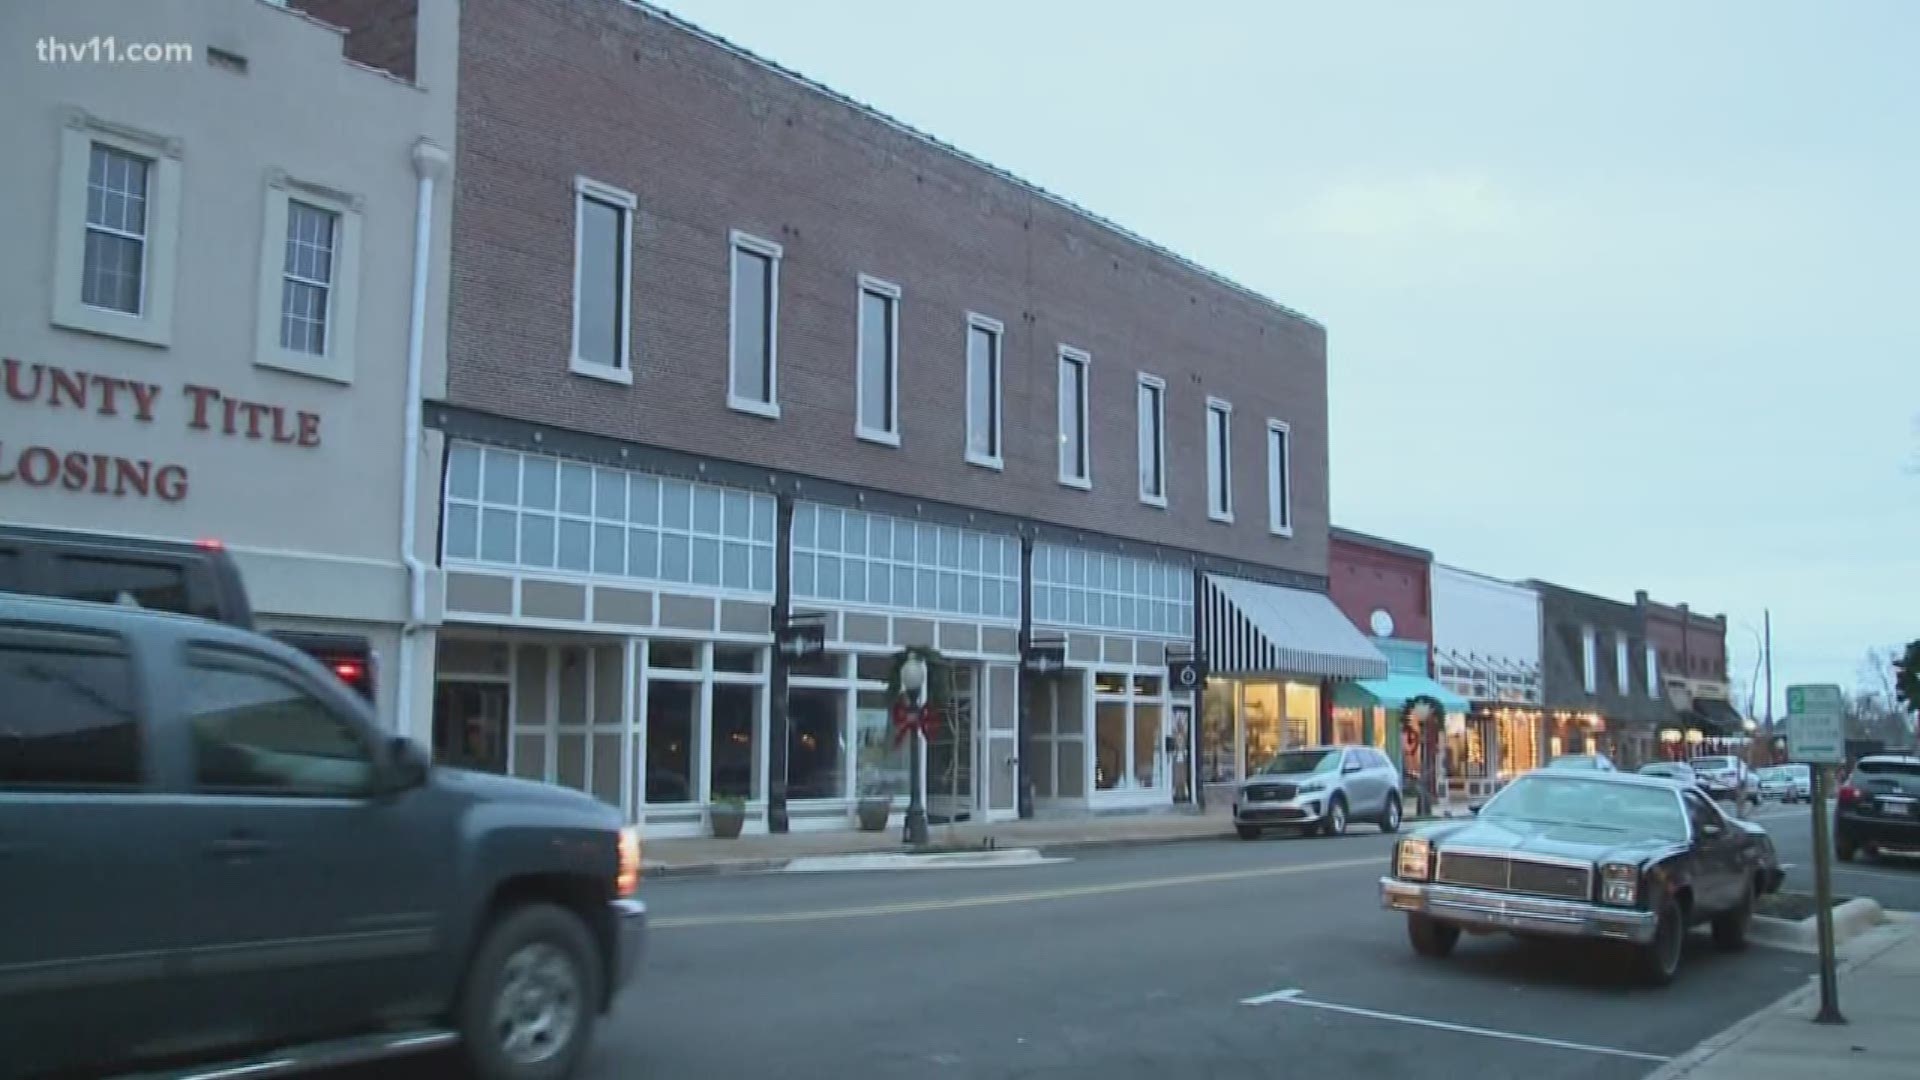 The town is among the top 10 communities that could potentially be featured on the Hulu show "small business revolution" with famous host Ty Pennington.